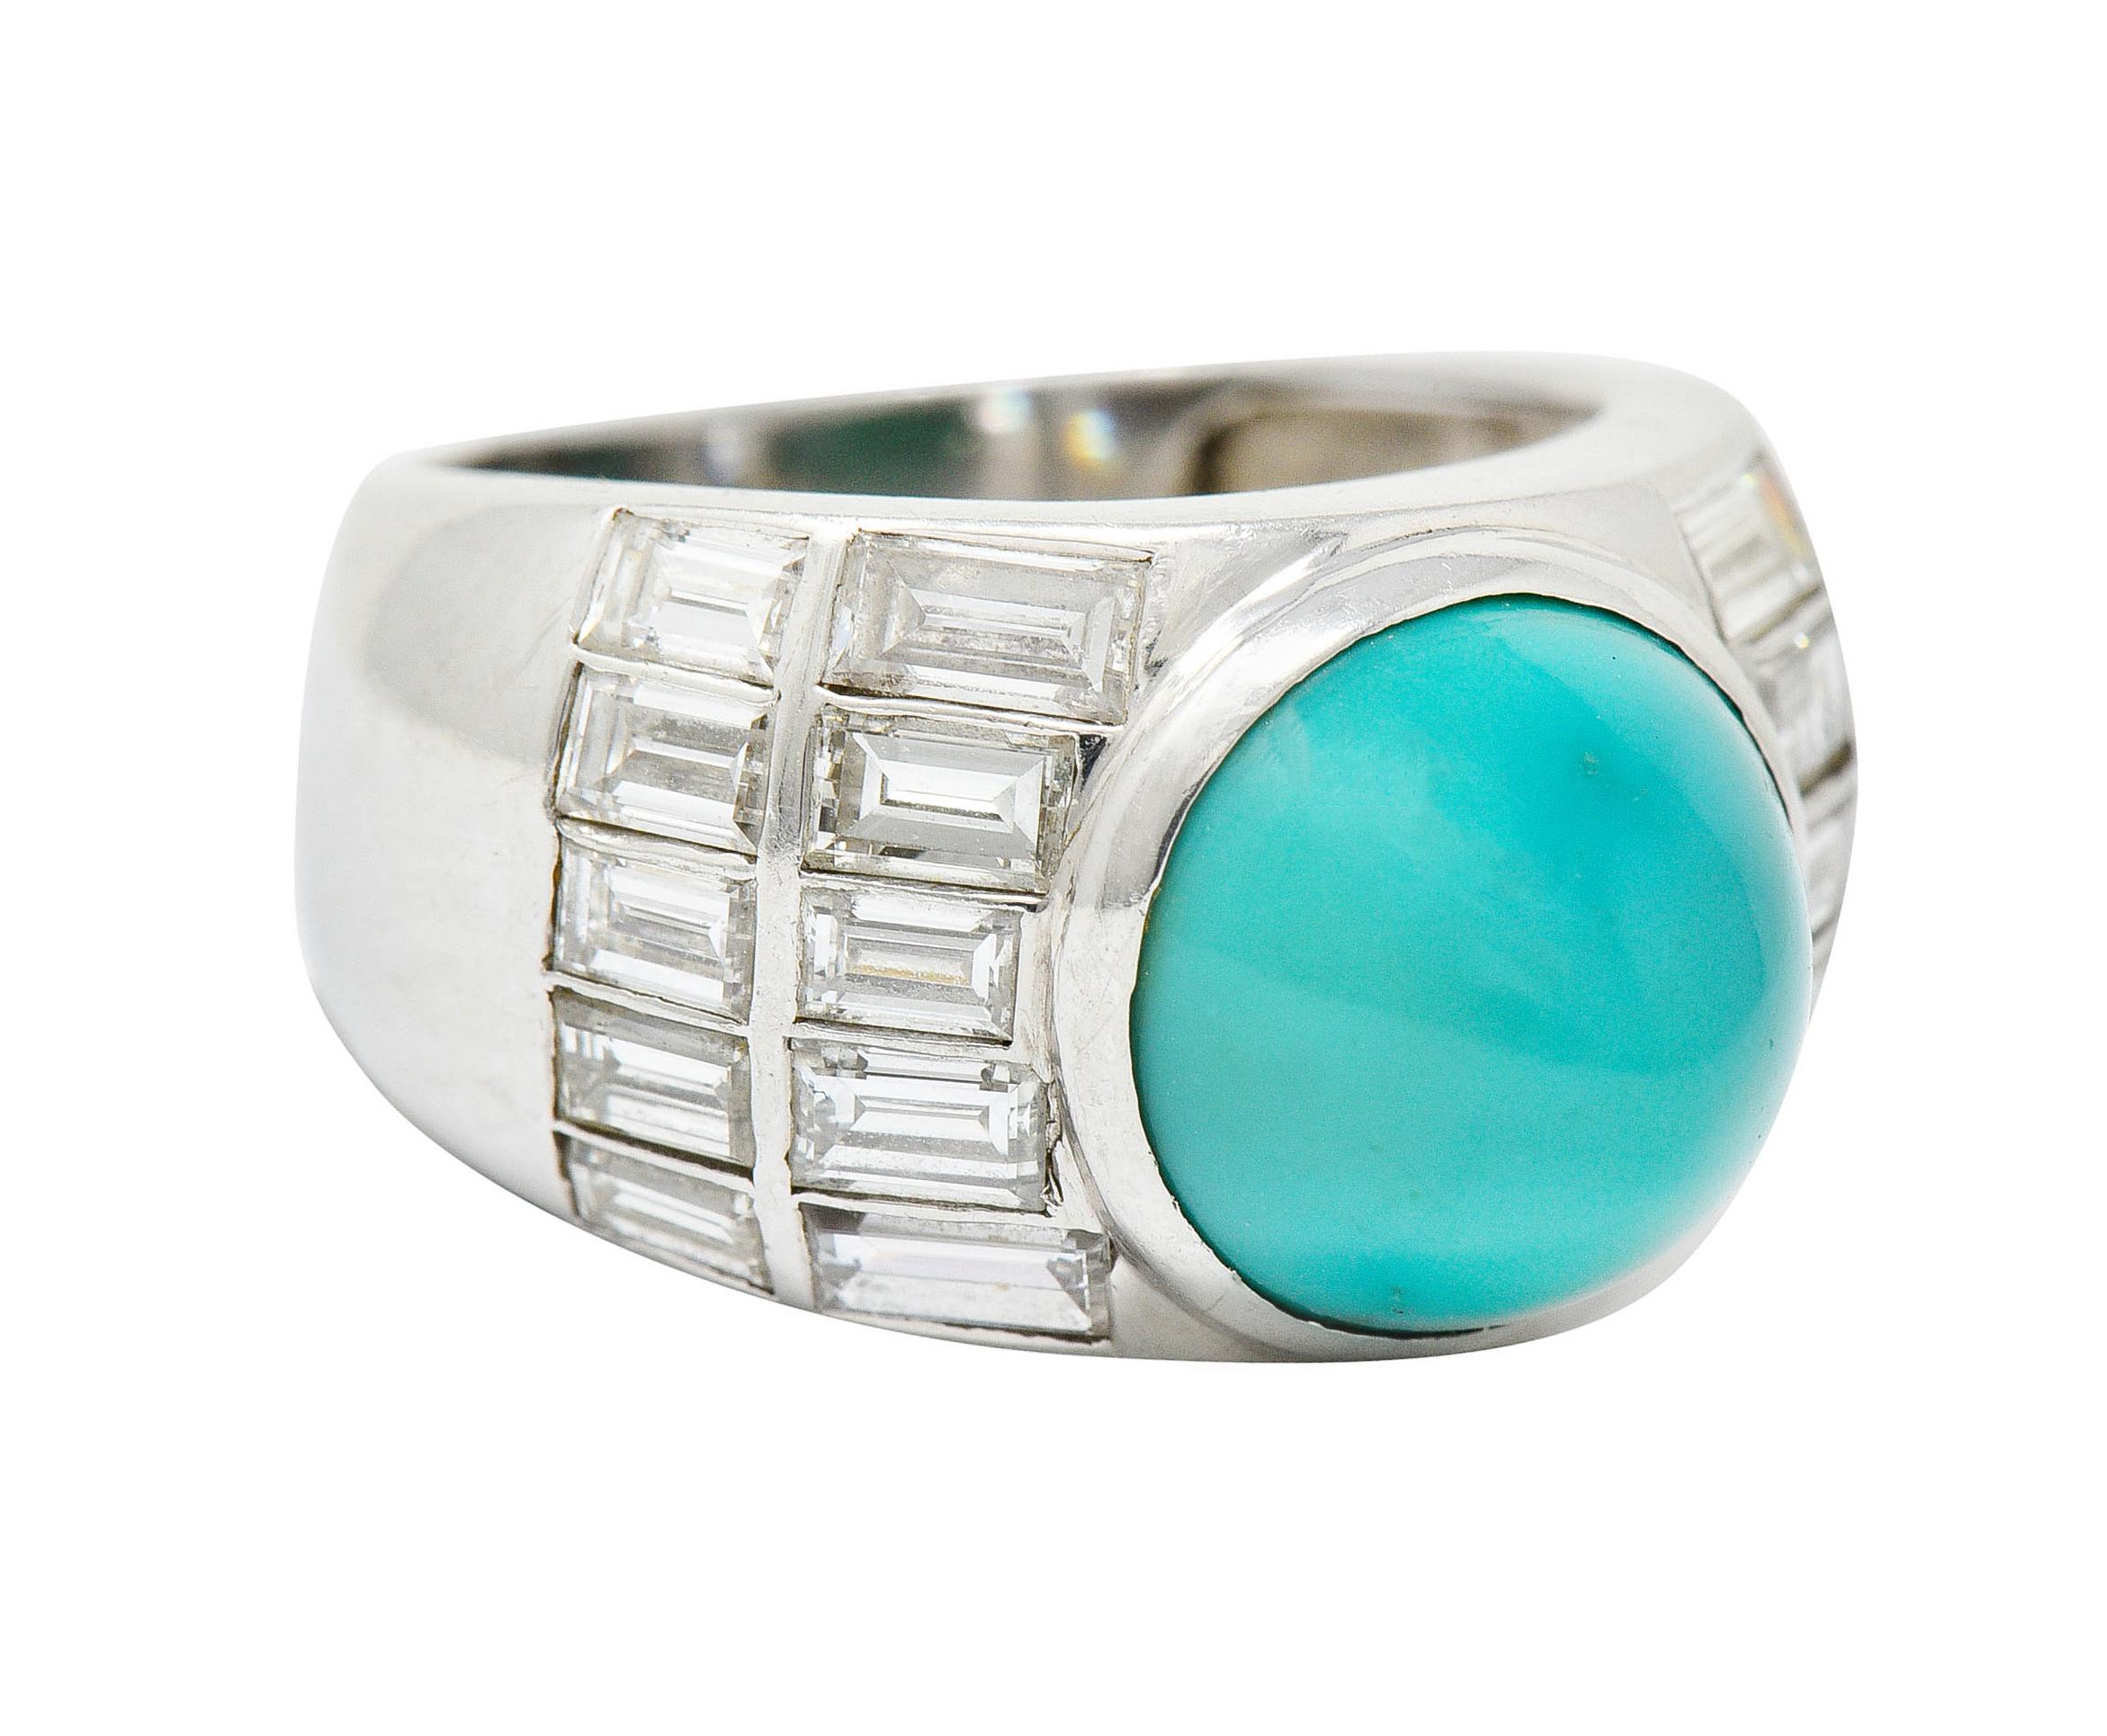 Wide band ring centers a 10.5 mm highly domed bullet cabochon of turquoise

Opaque with uniform green/blue color and very little matrix

Flanked by rows of bezel set baguette cut diamonds

Weighing in total approximately 2.50 carats with G to I